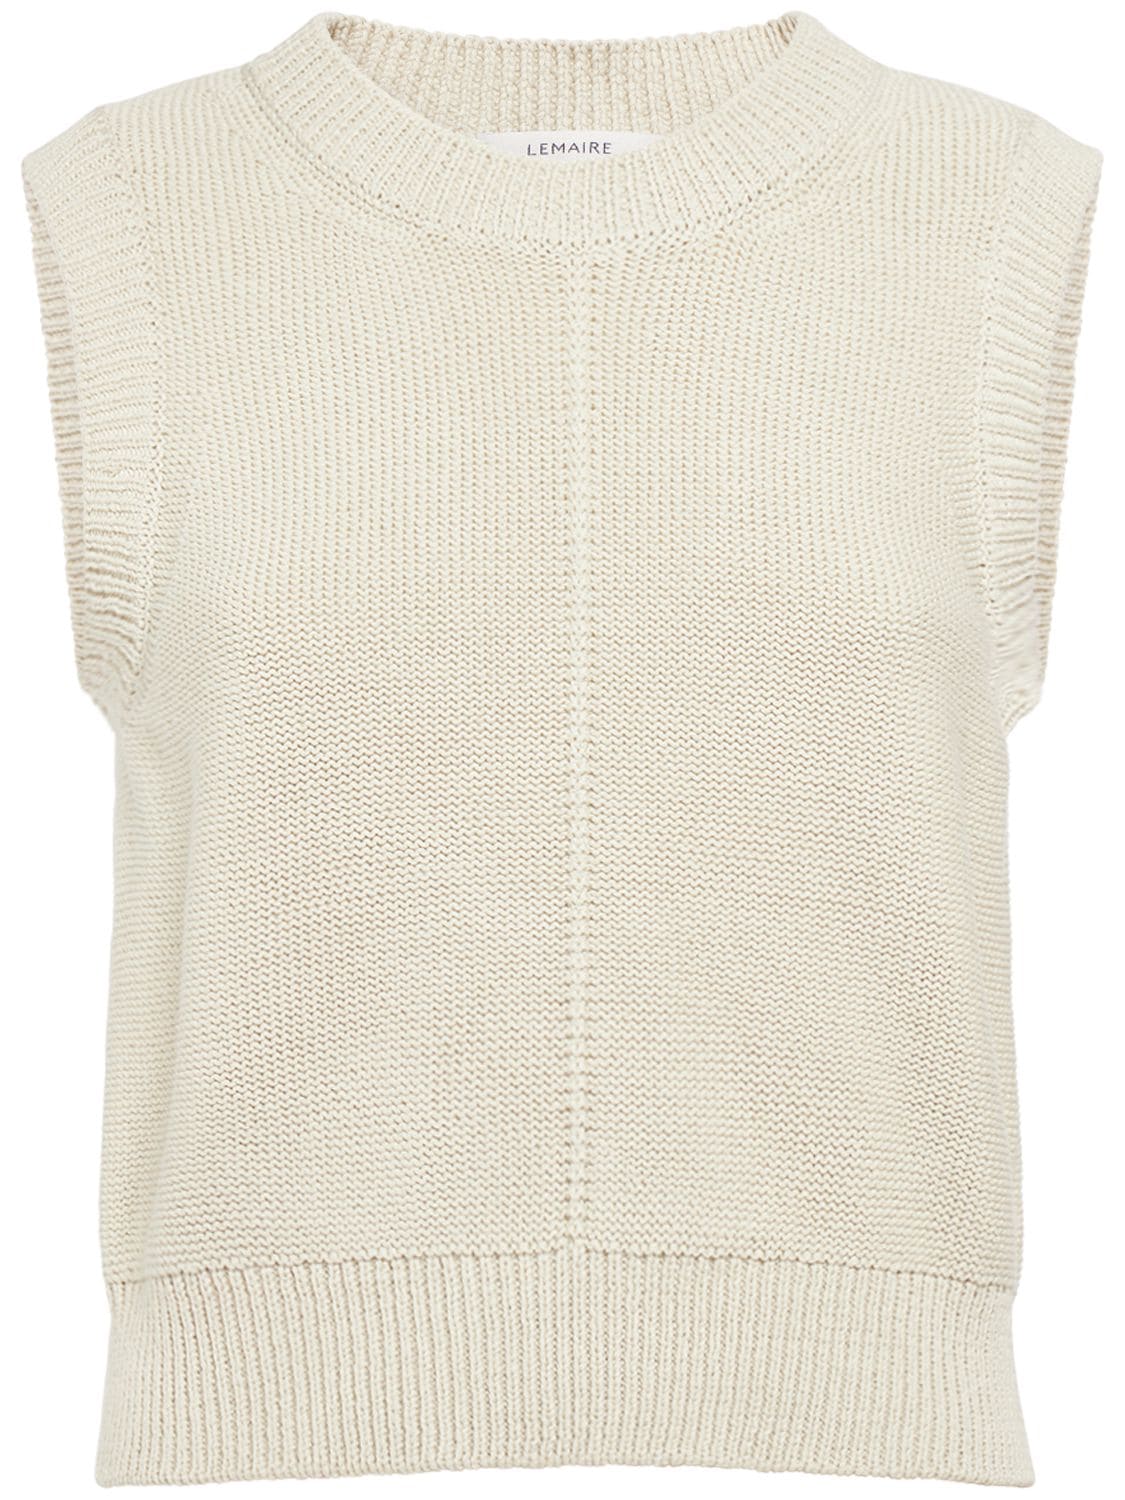 Lemaire Sleeveless Cropped Cotton Knit Jumper In Grey